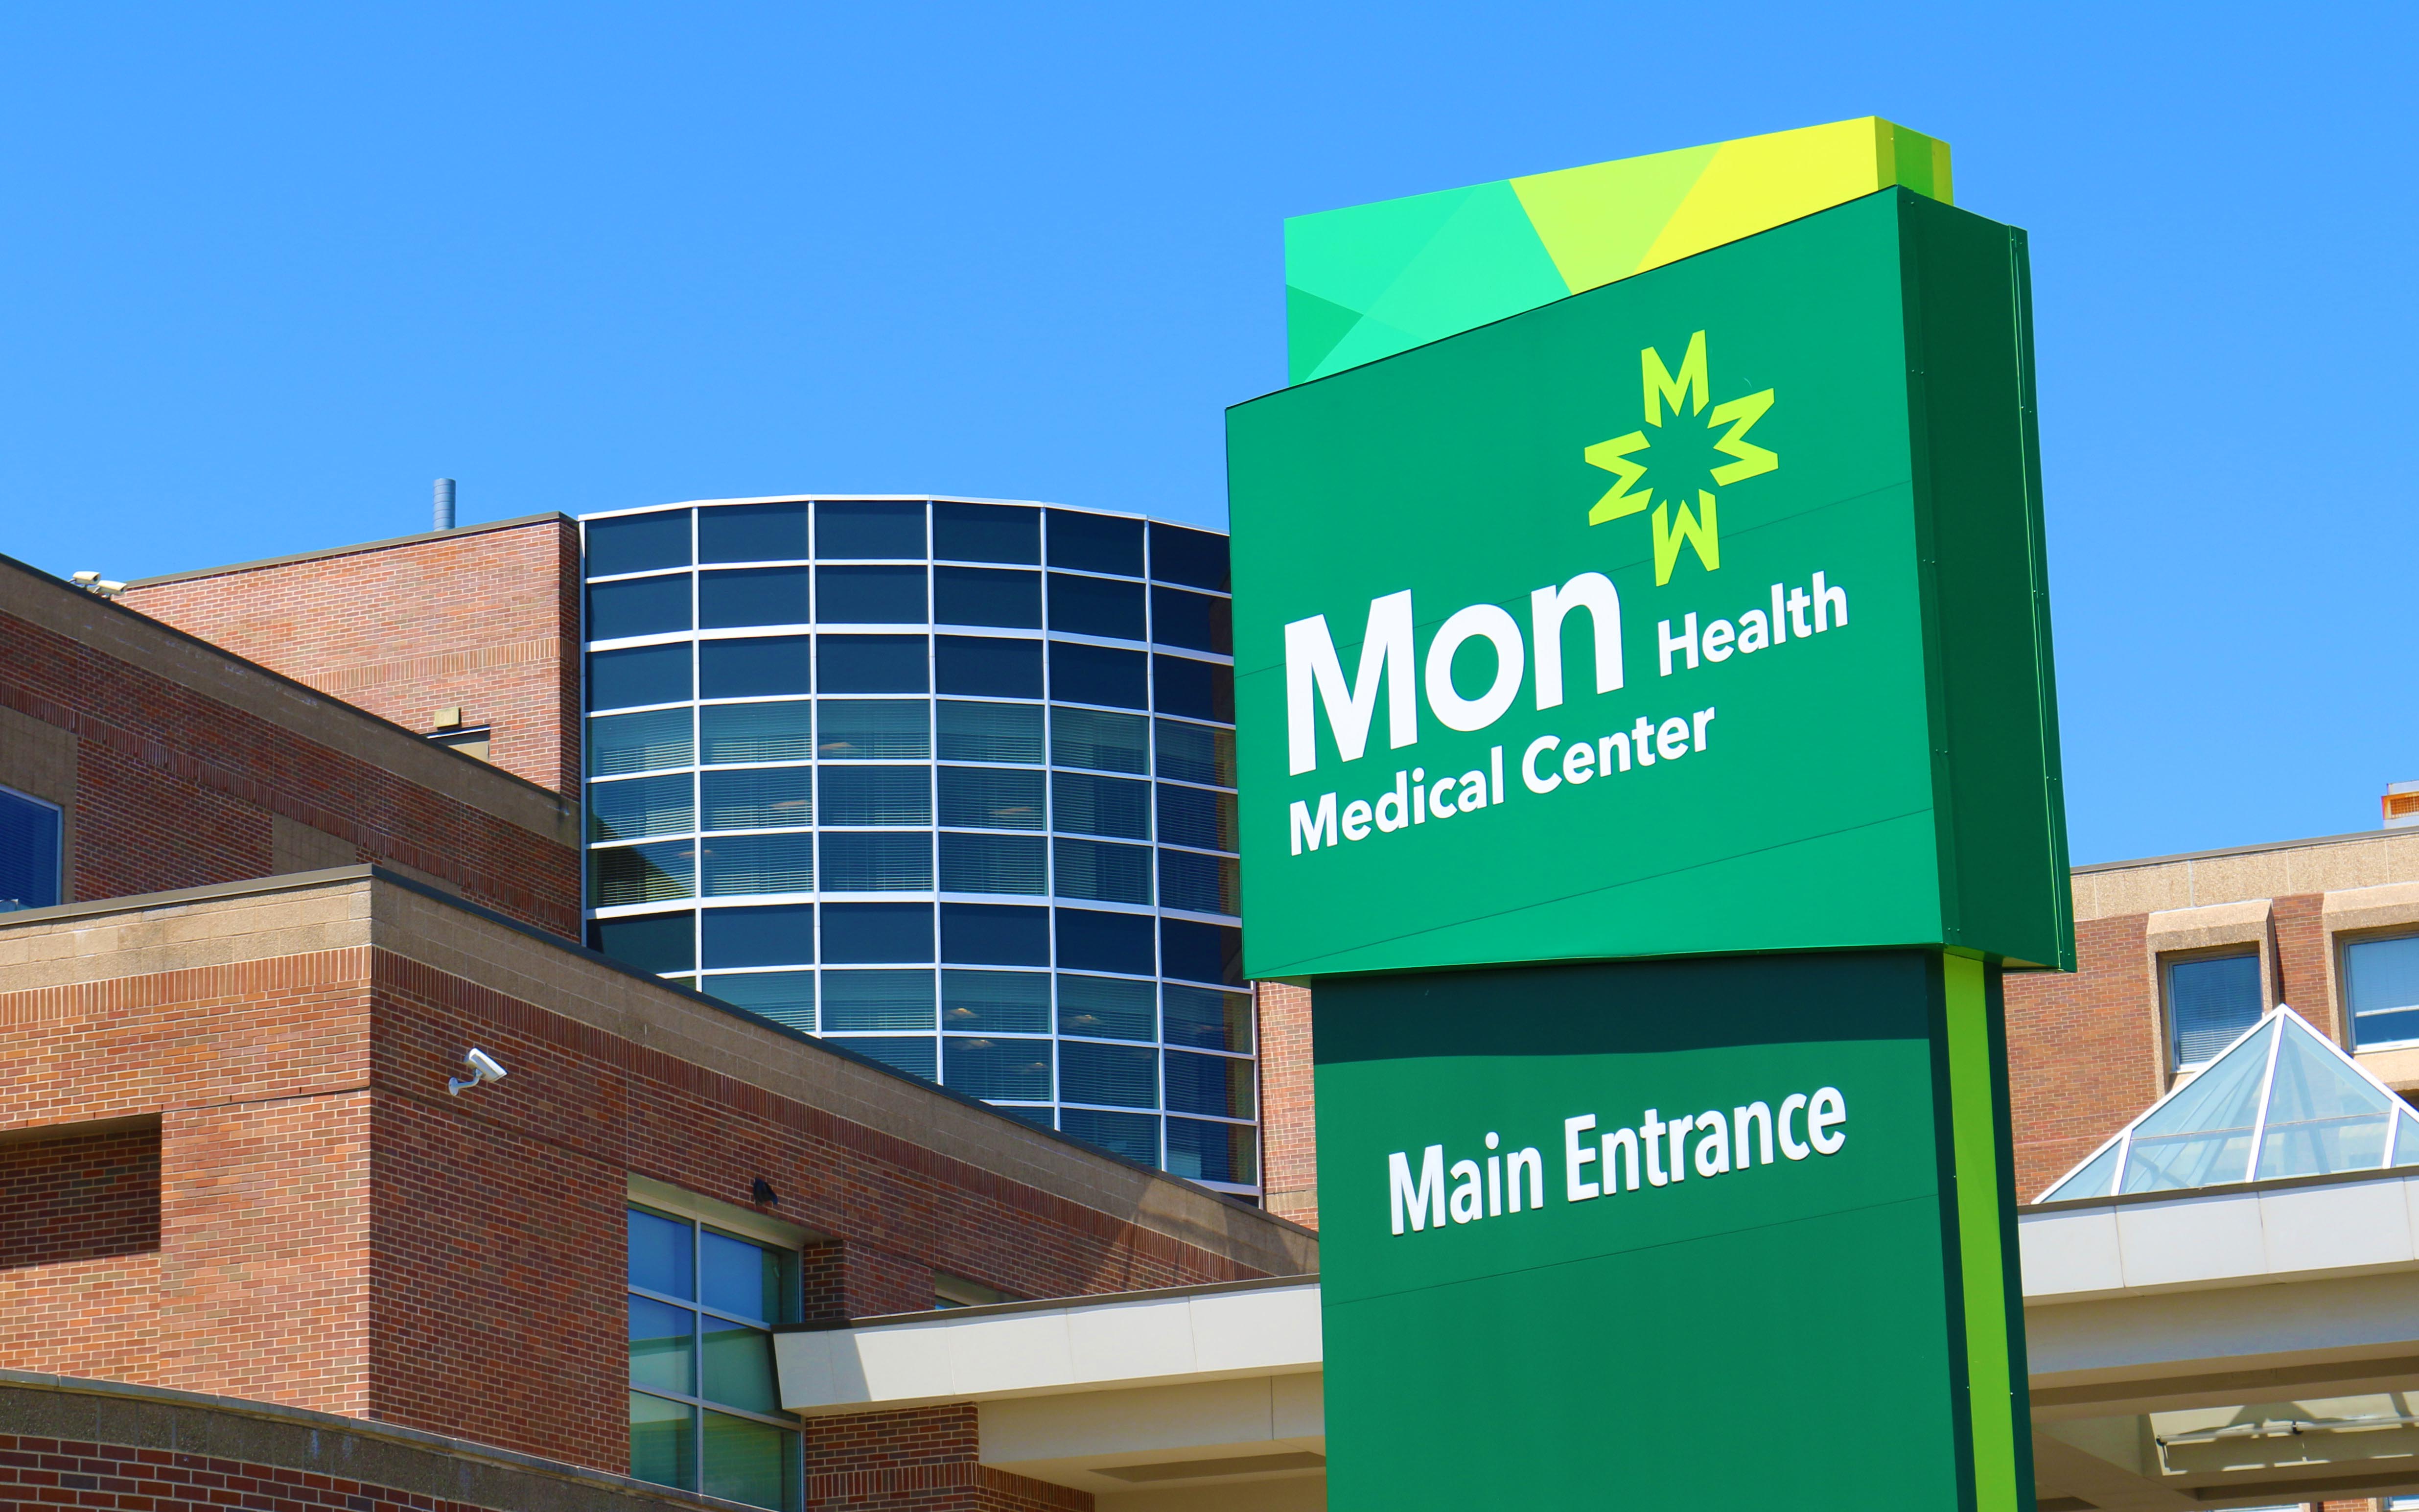 Mon Health Medical Center Recognized for Excellence in Financial Communication